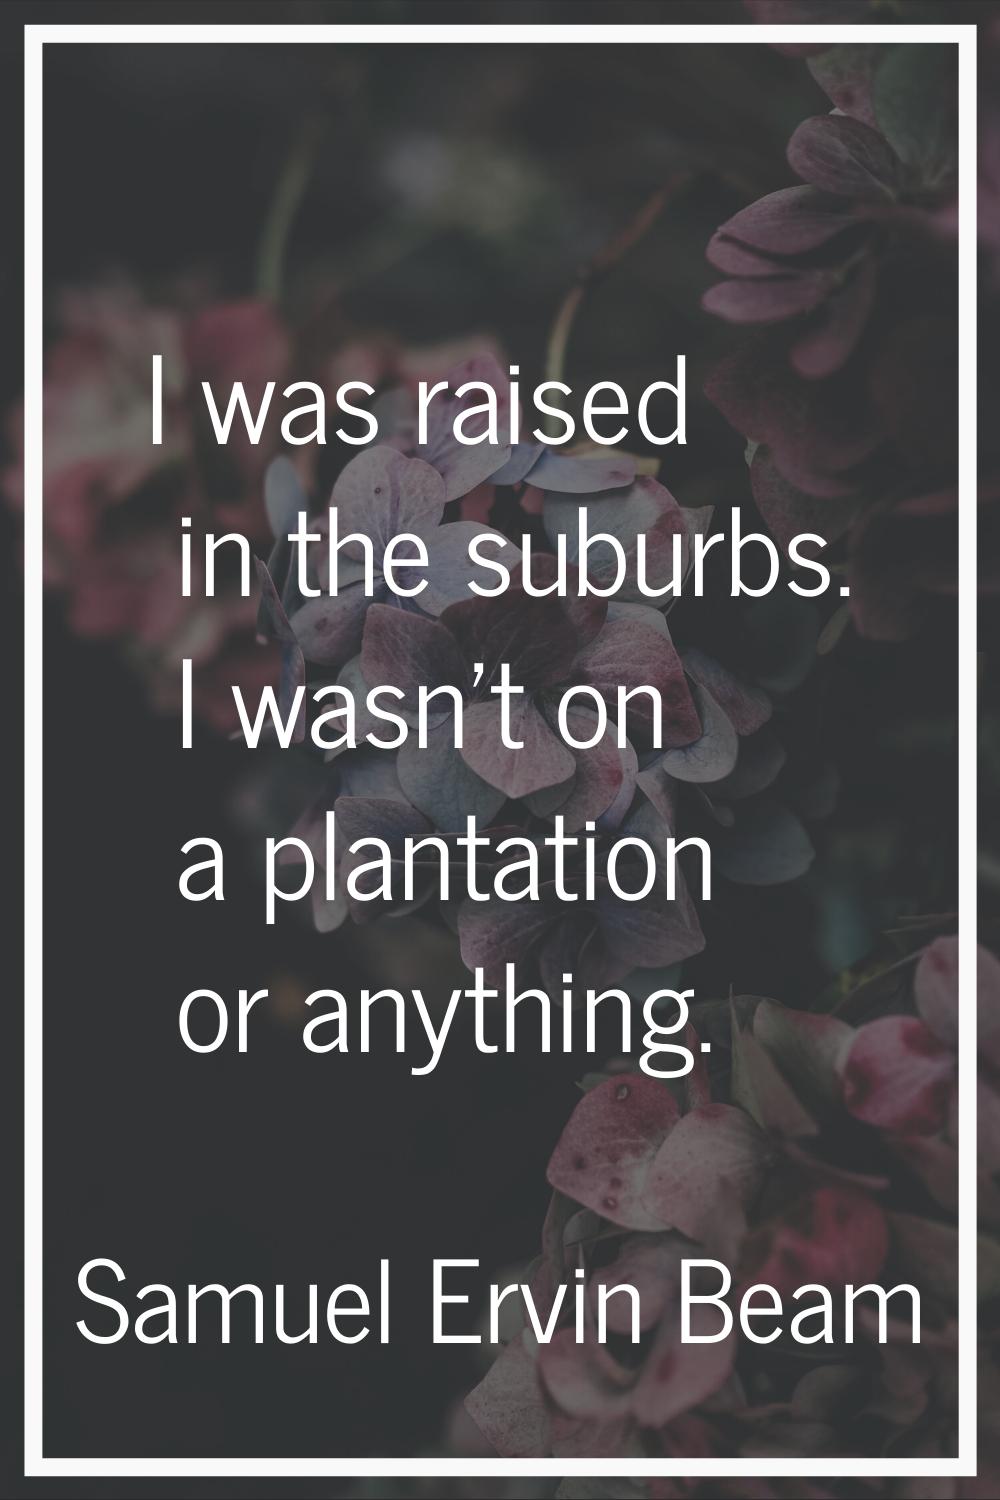 I was raised in the suburbs. I wasn't on a plantation or anything.